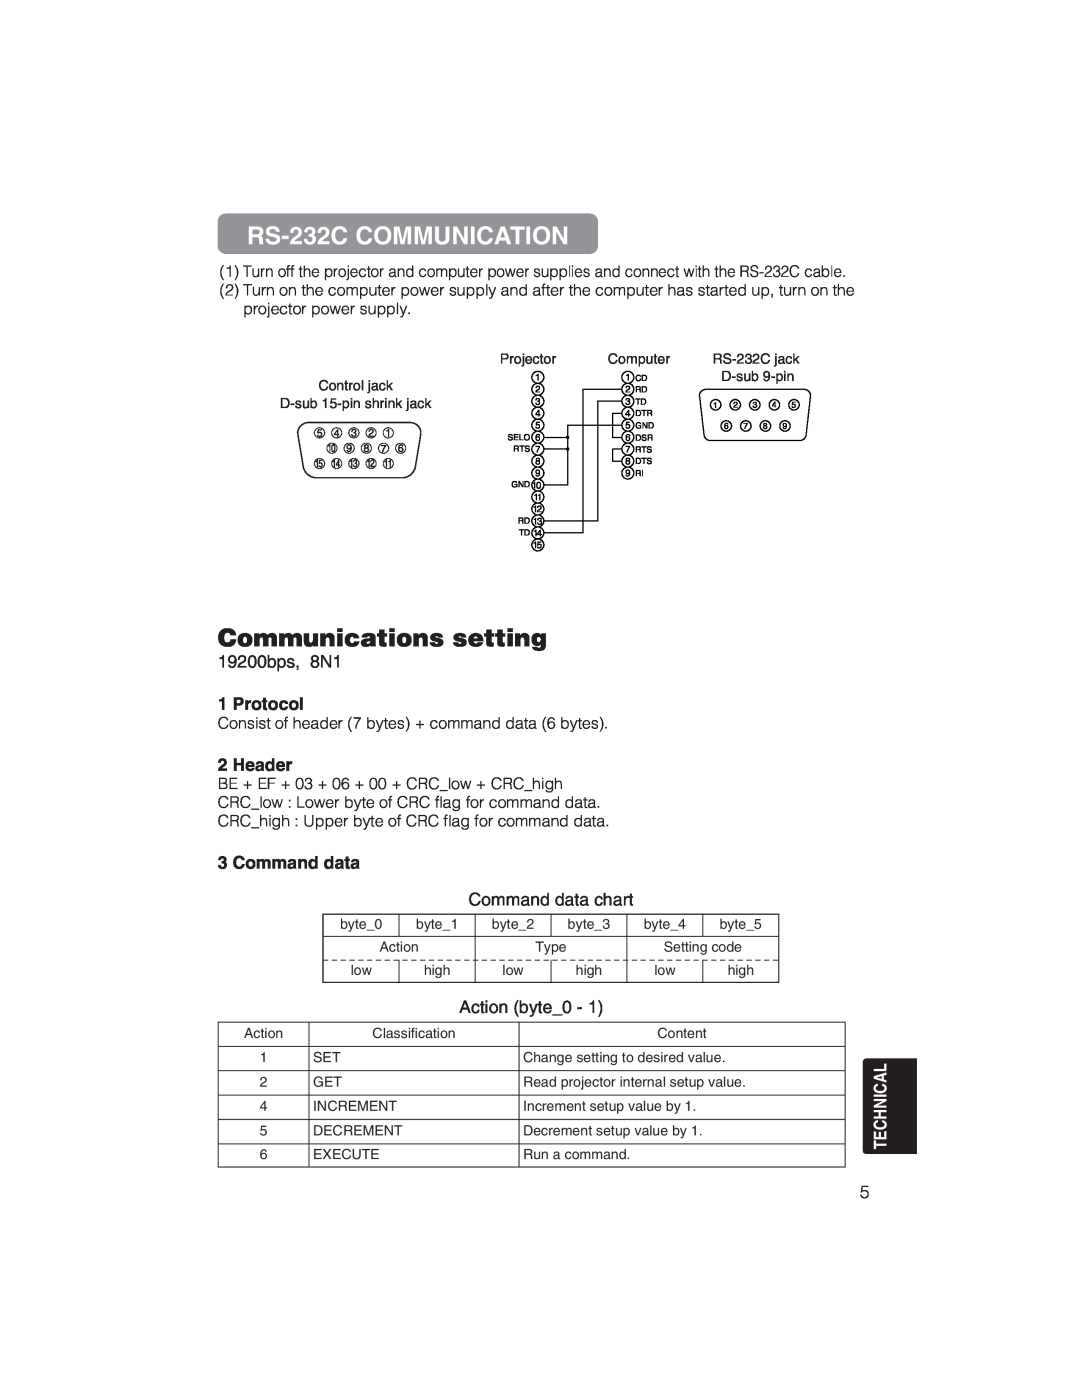 BOXLIGHT CP322ia user manual RS-232C COMMUNICATION, Communications setting, 19200bps, 8N1, Protocol, Header, Command data 